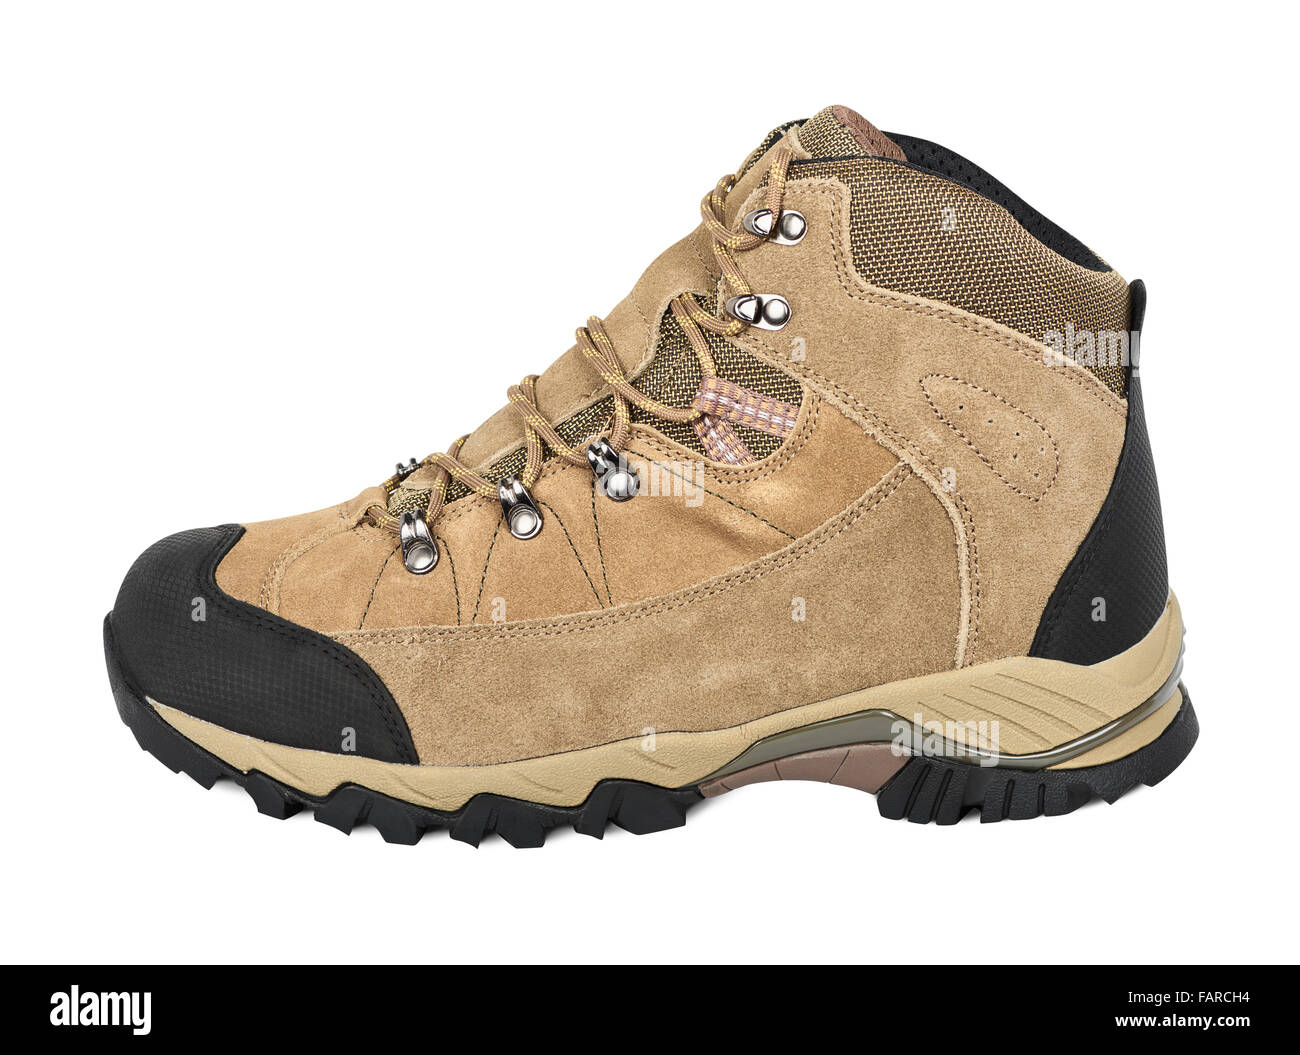 One outdoor hiking shoe on a white background Stock Photo